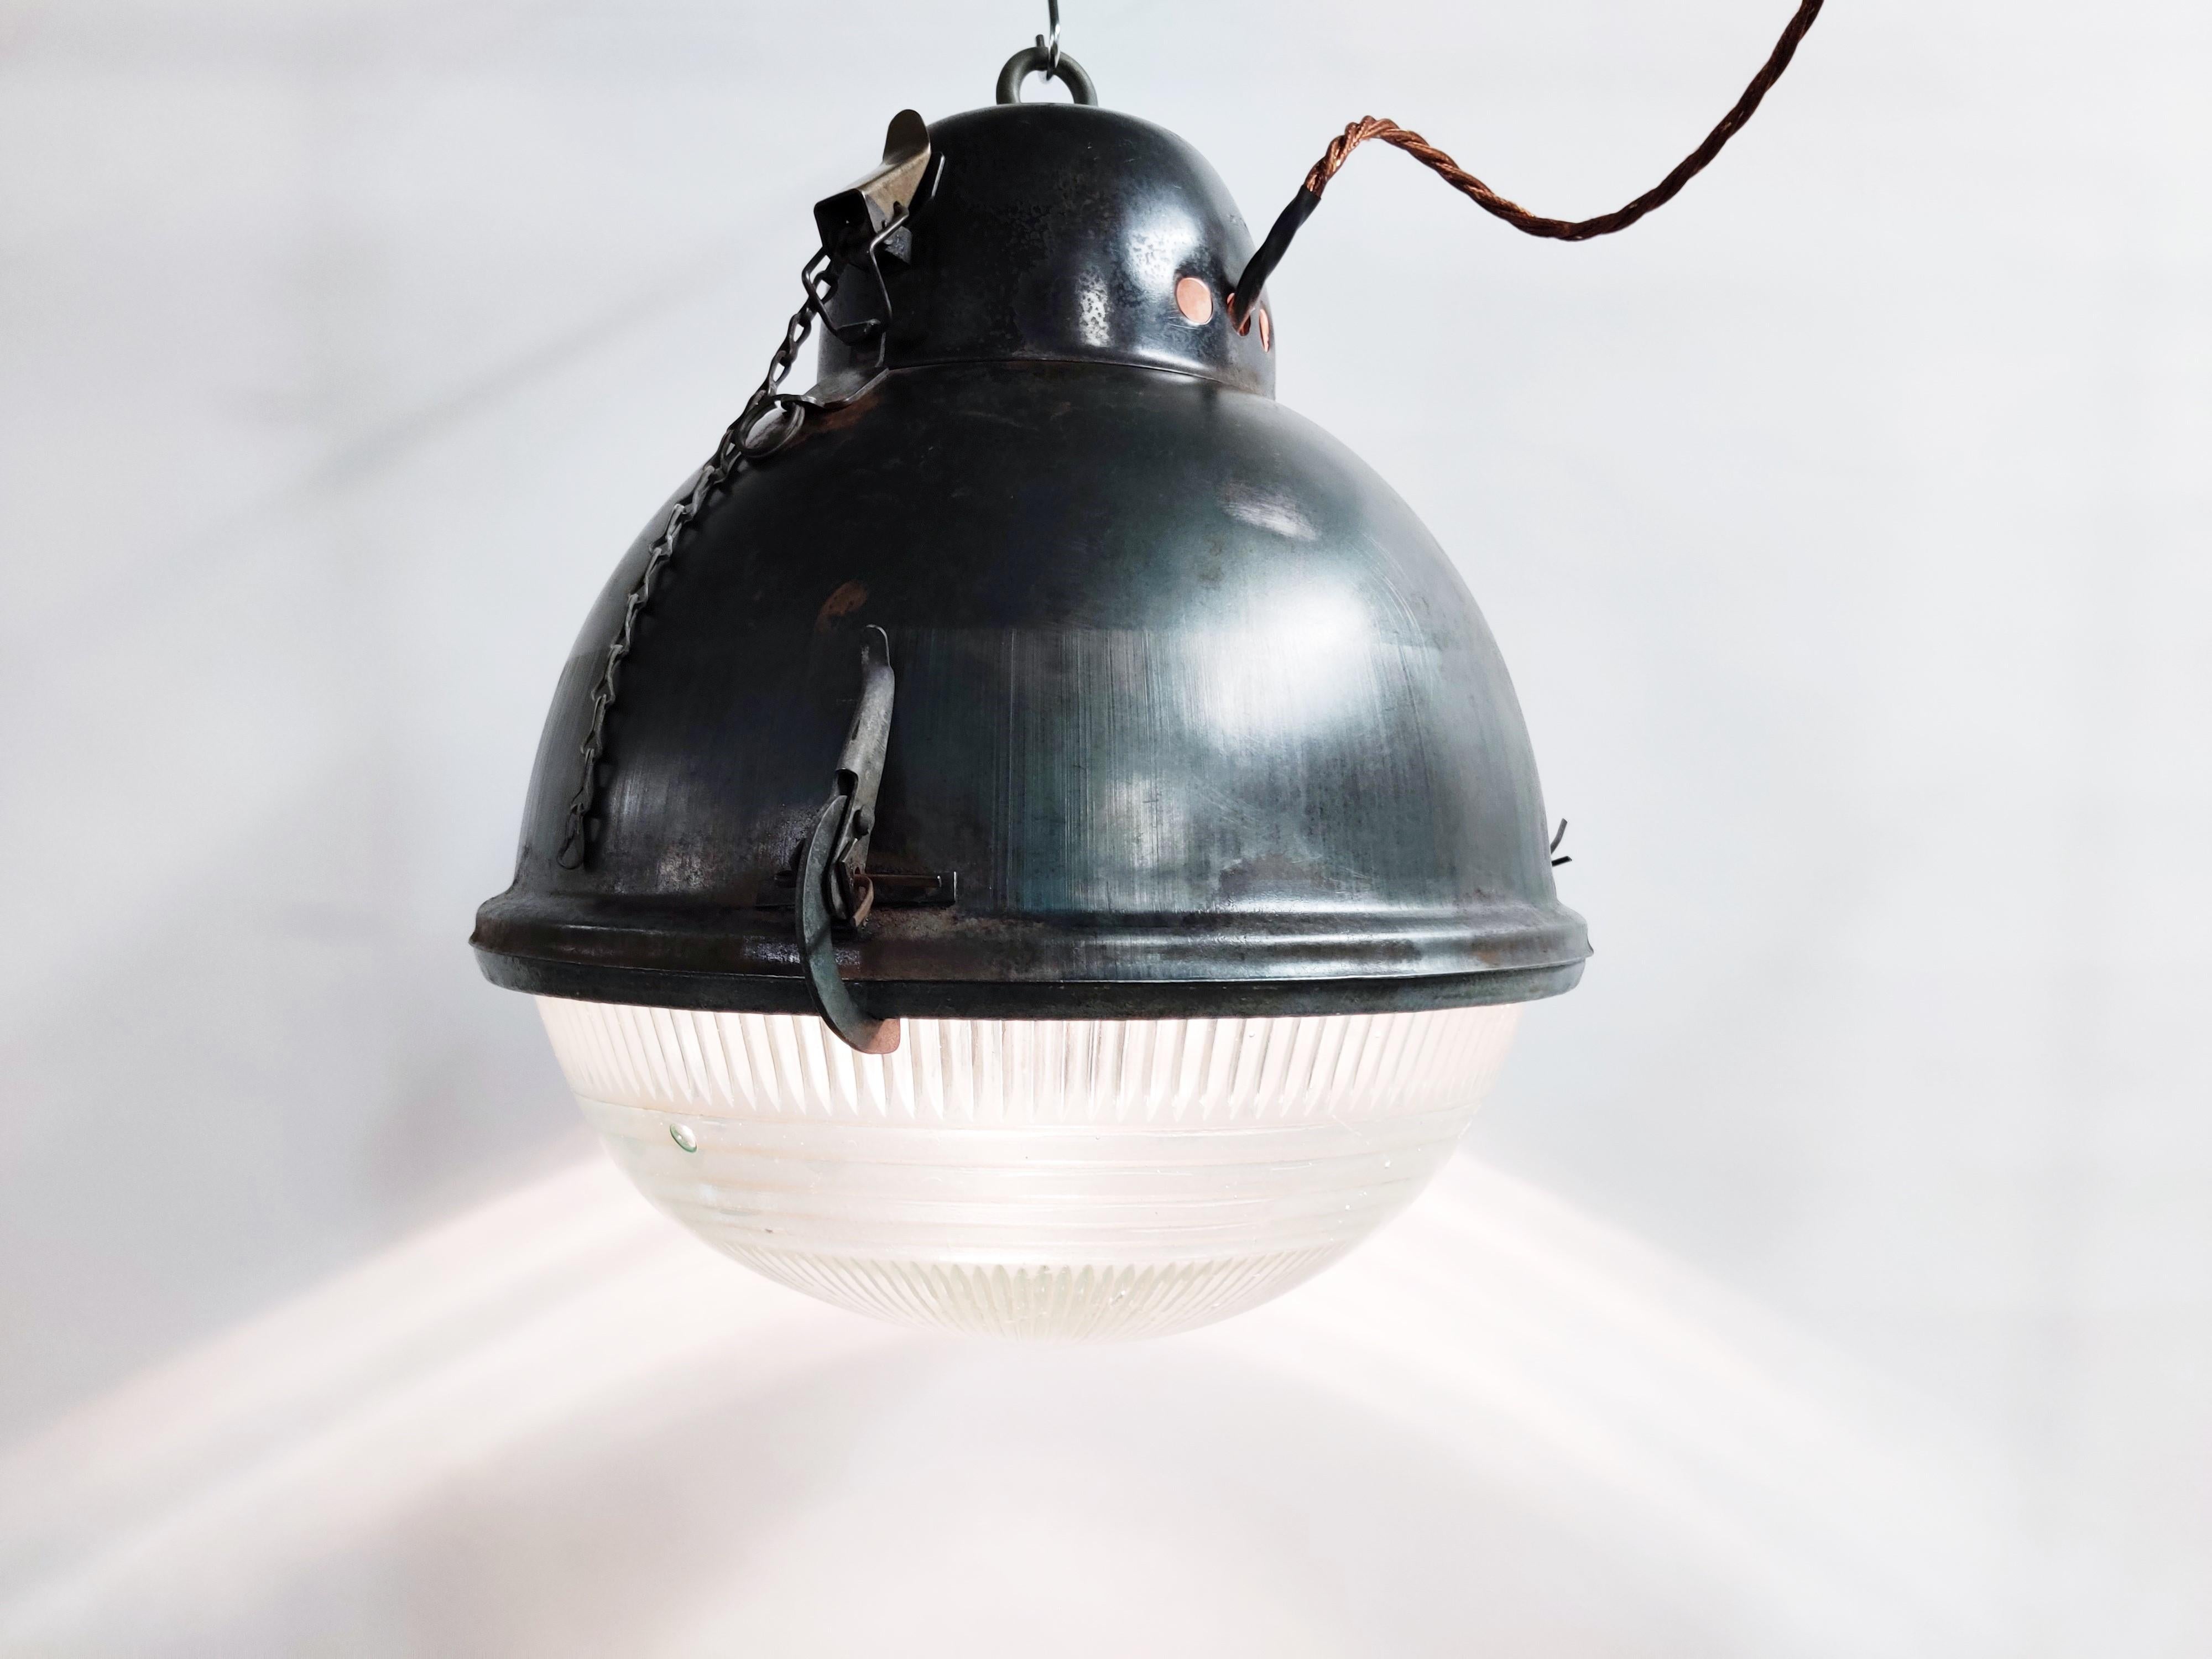 Industrial 'ball' lamps with prismatic glass. They would have been used as street lamps.
 
These Industrial lamps give a beautiful light thanks to the prismatic glass.

The lamps have a nice Industrial look and would be a lovely contrast for a